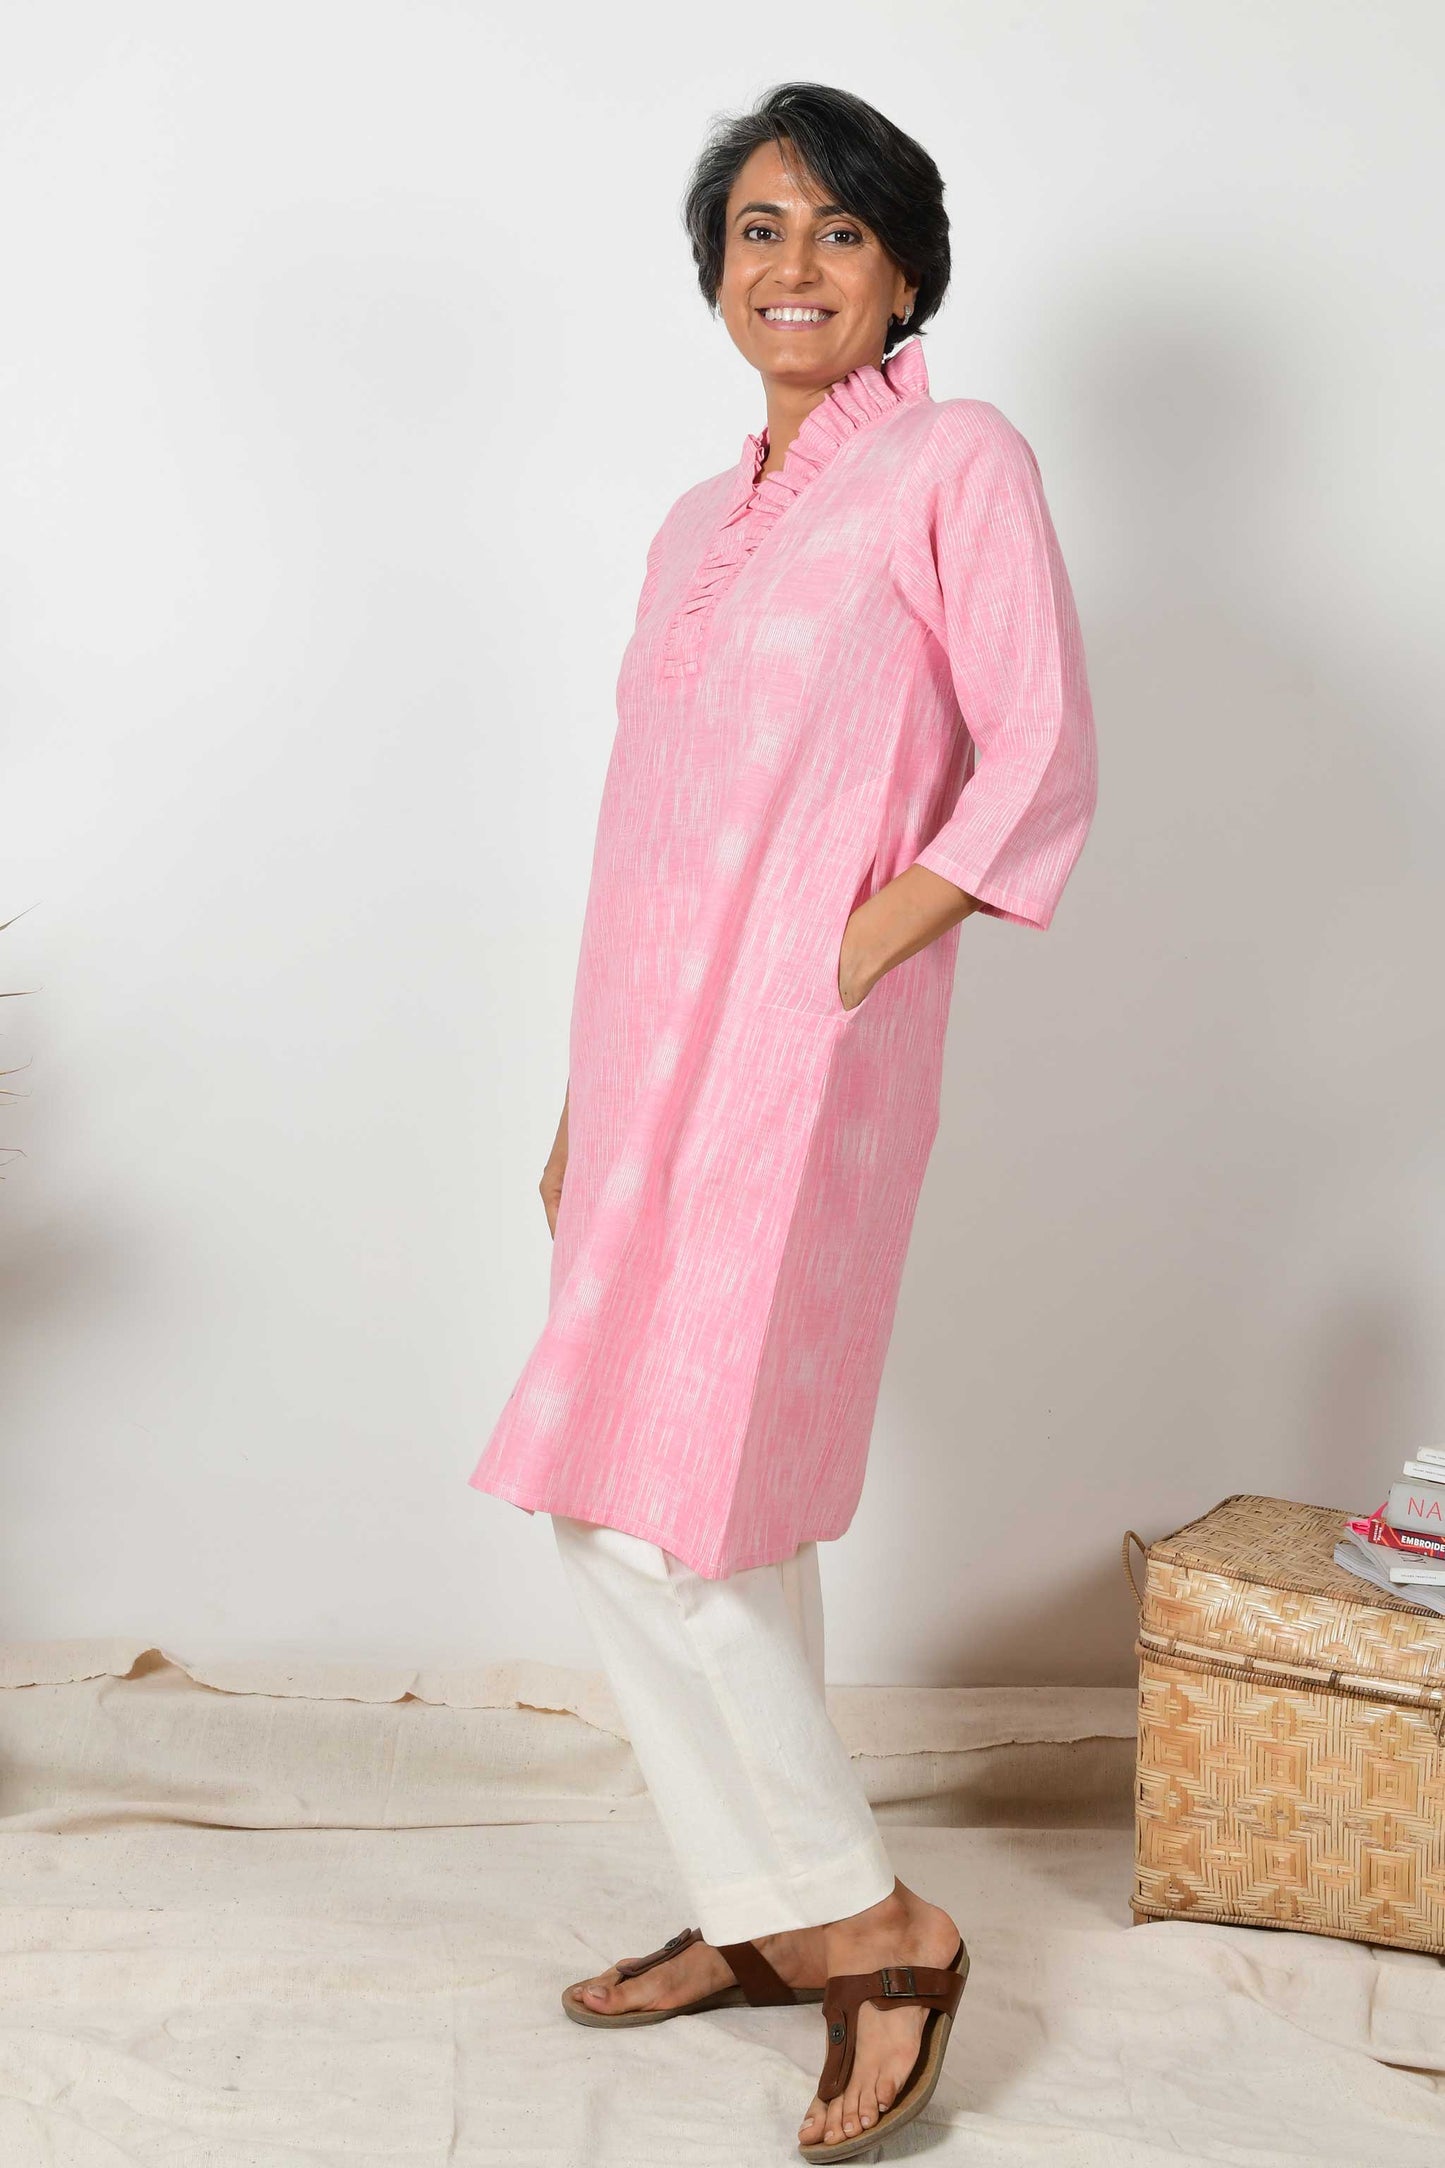 indian female model posing for the camera with hands in pockets and wearing white pants and pink flared neck dress kurta.